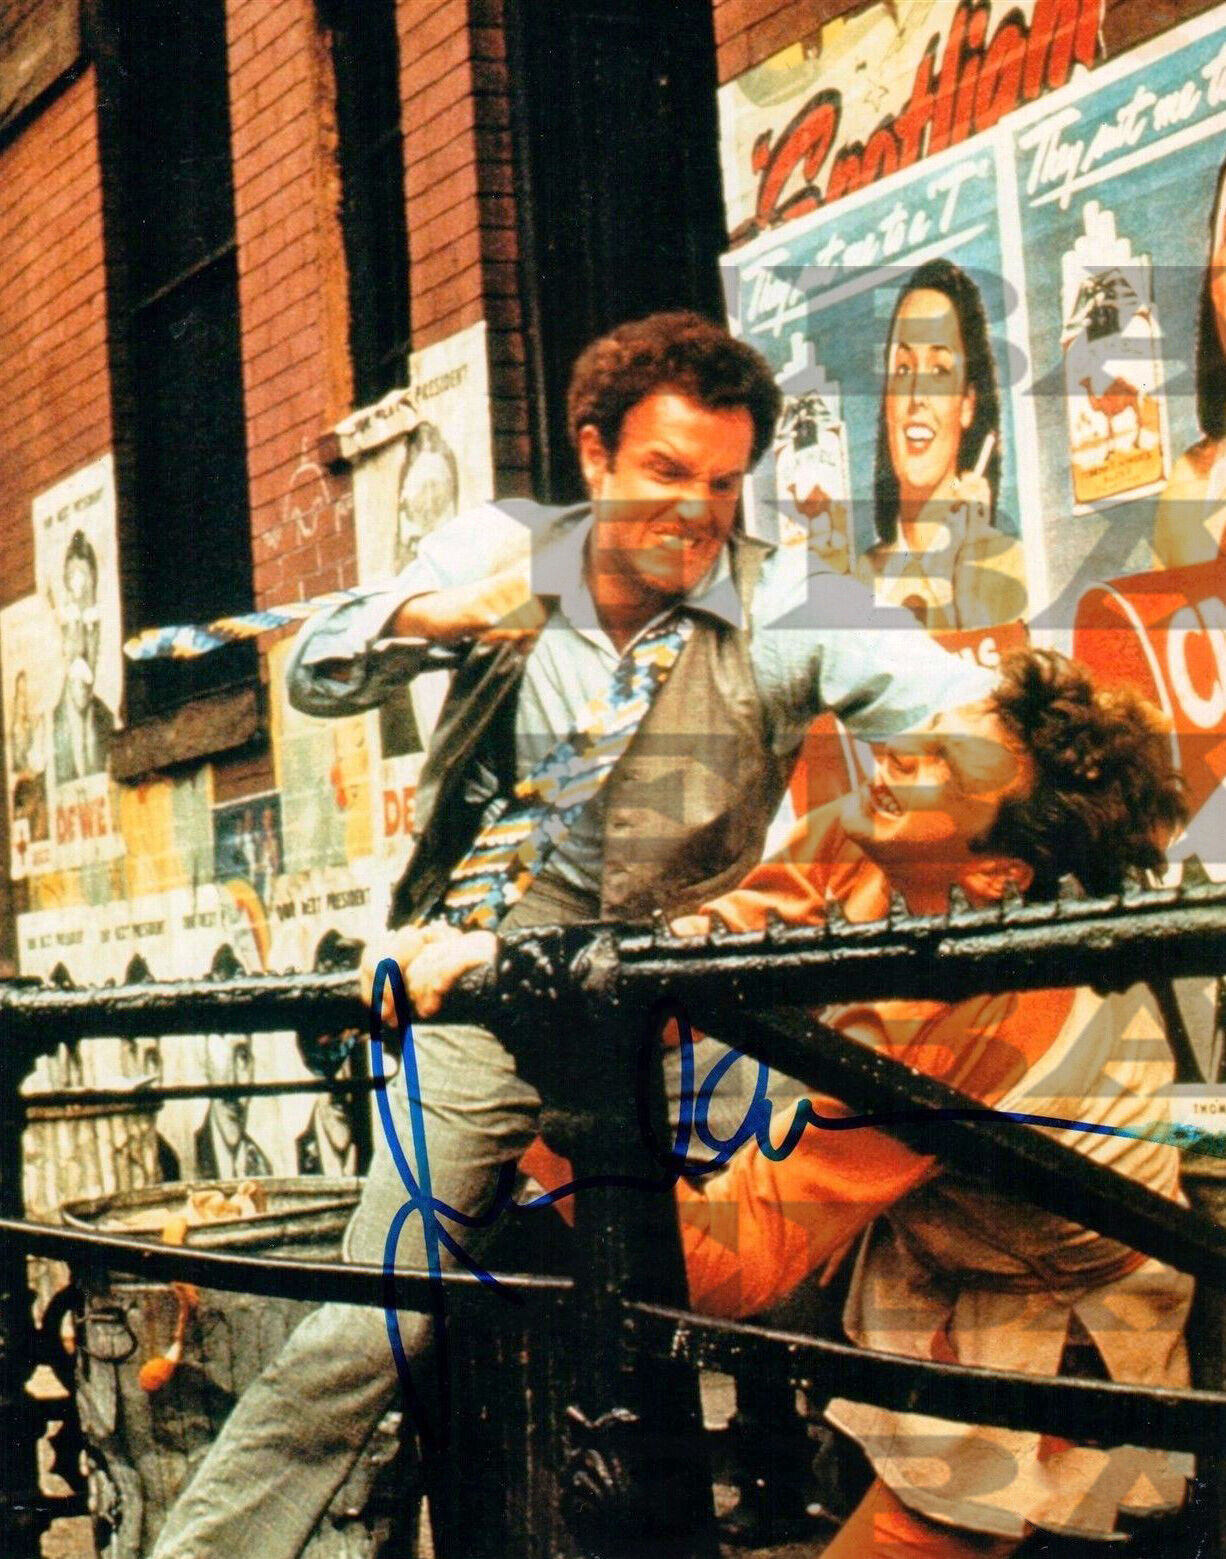 James Caan Godfather Sonny Corleone Autographed Signed 8x10 Photo Poster painting Reprint